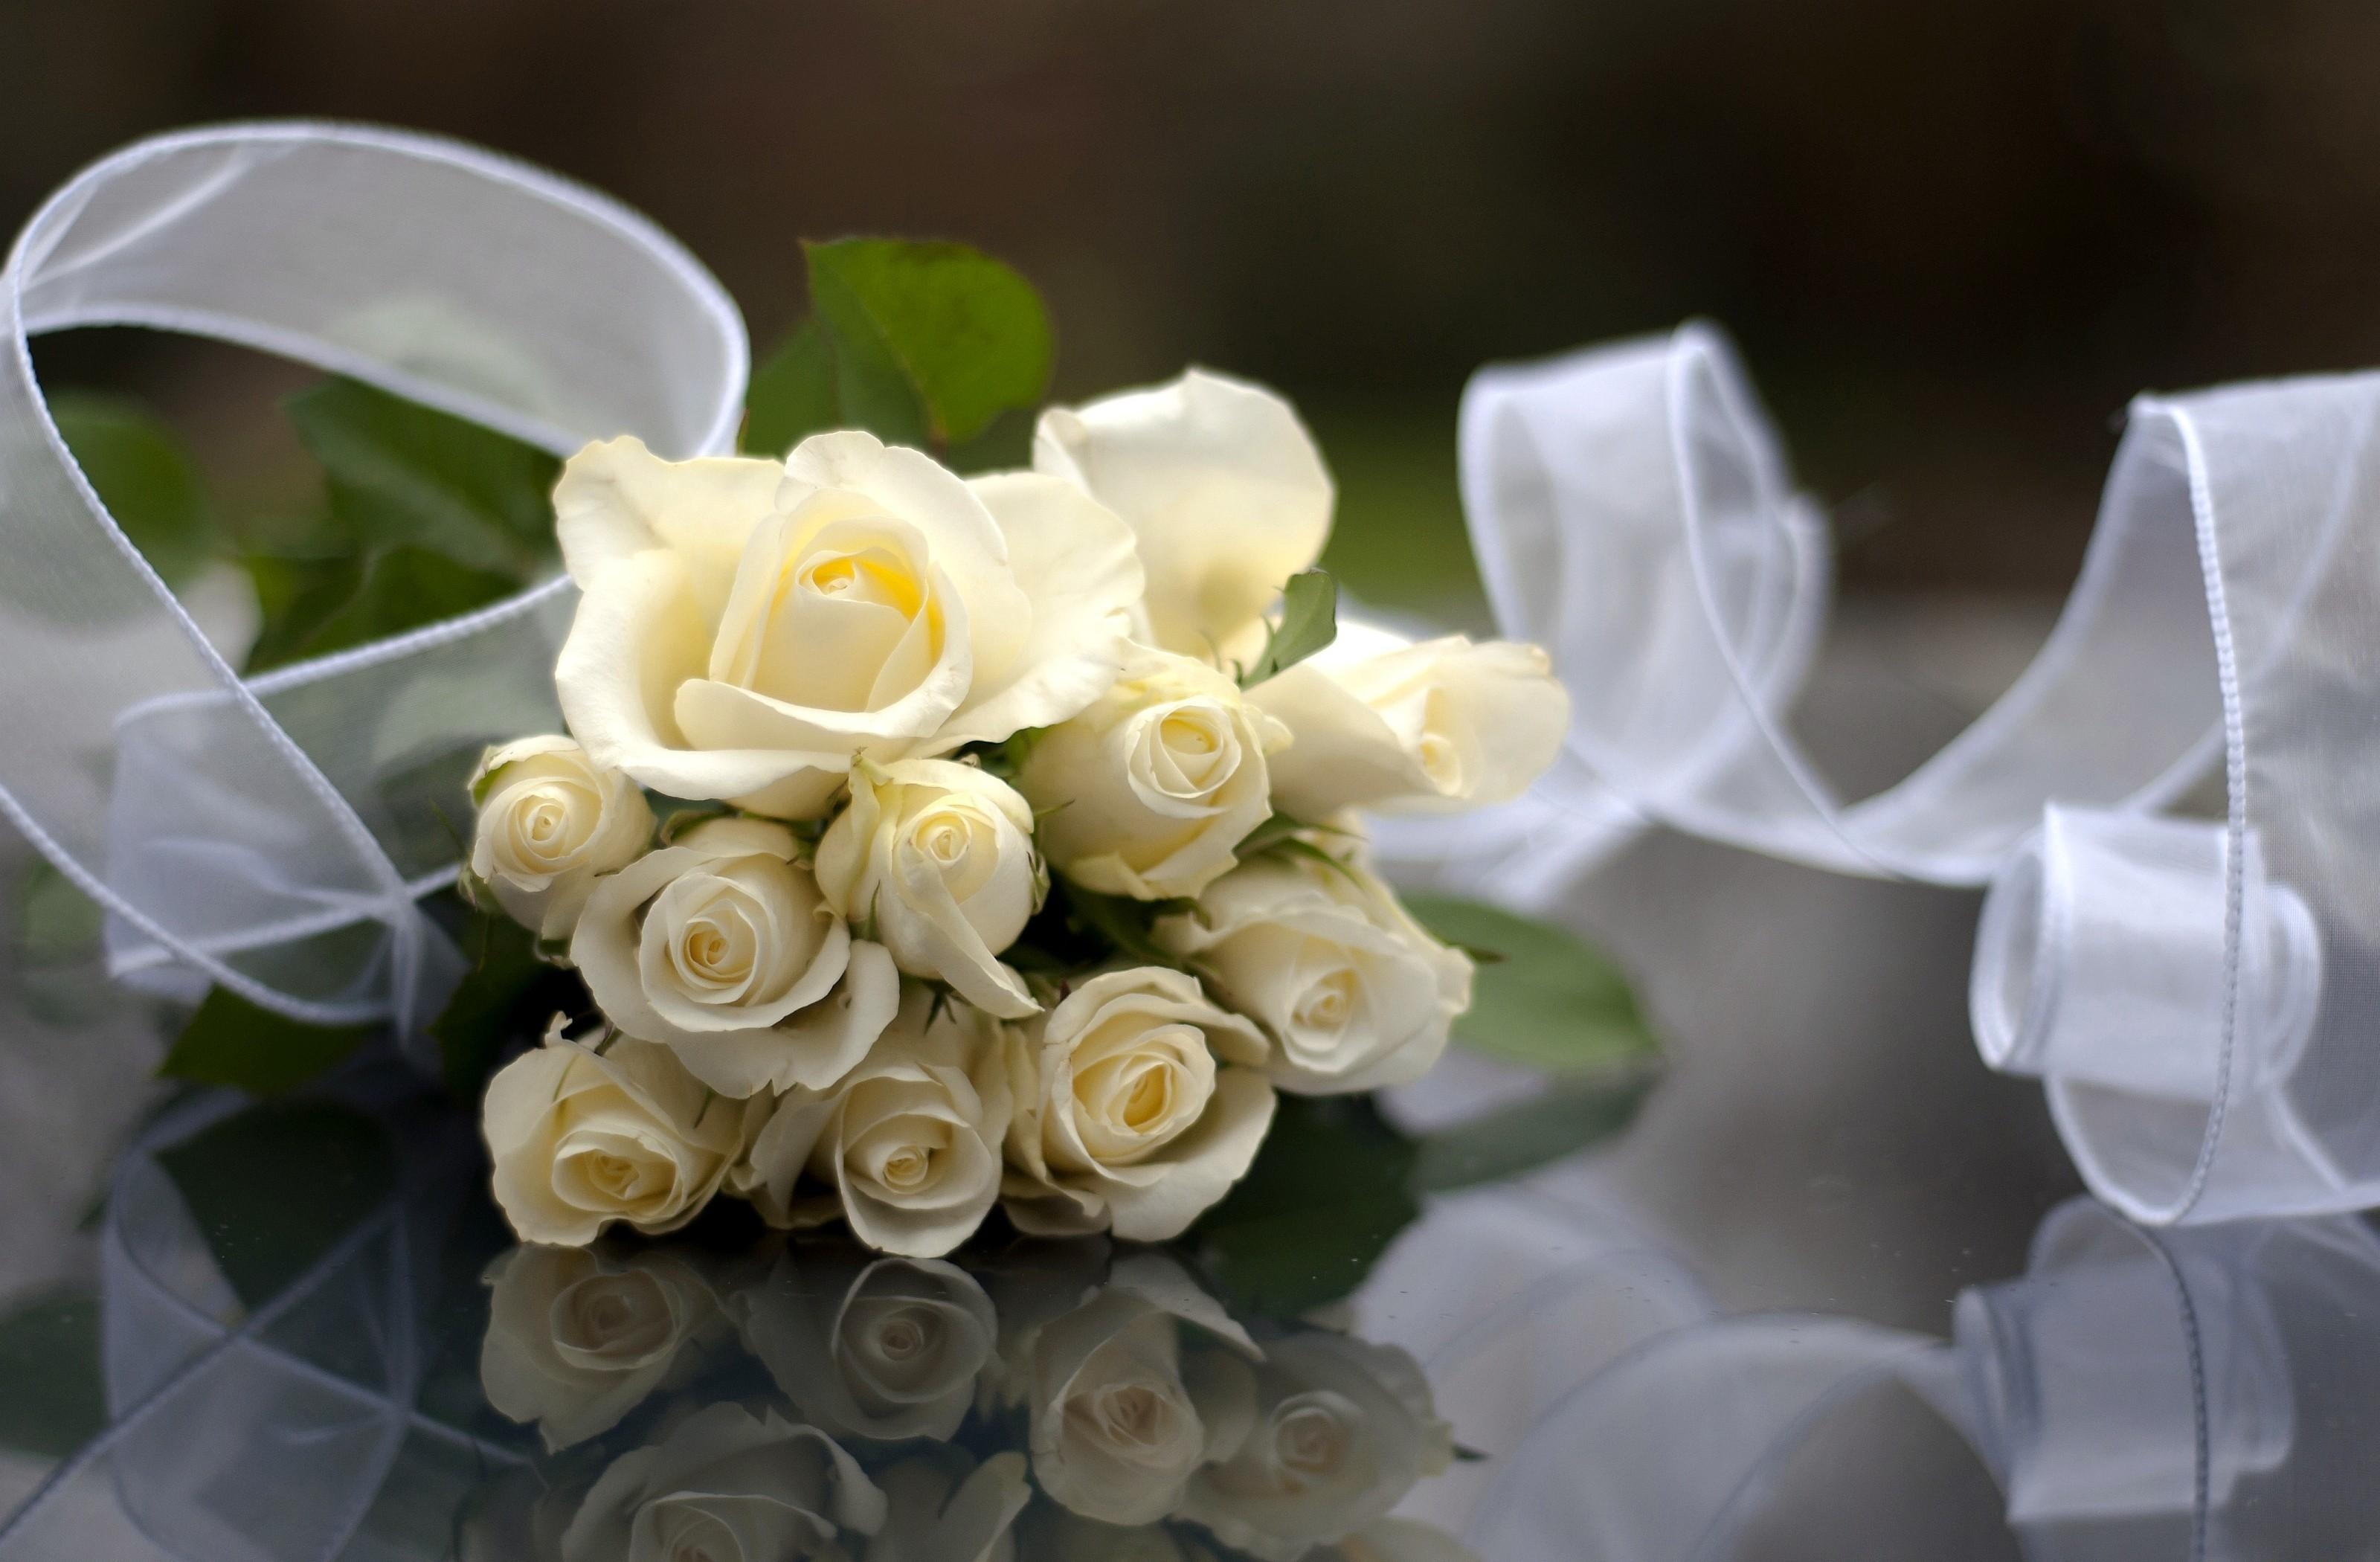 Rose White Flowers Bouquet Ribbon Reflection - HD Wallpapers and Picture